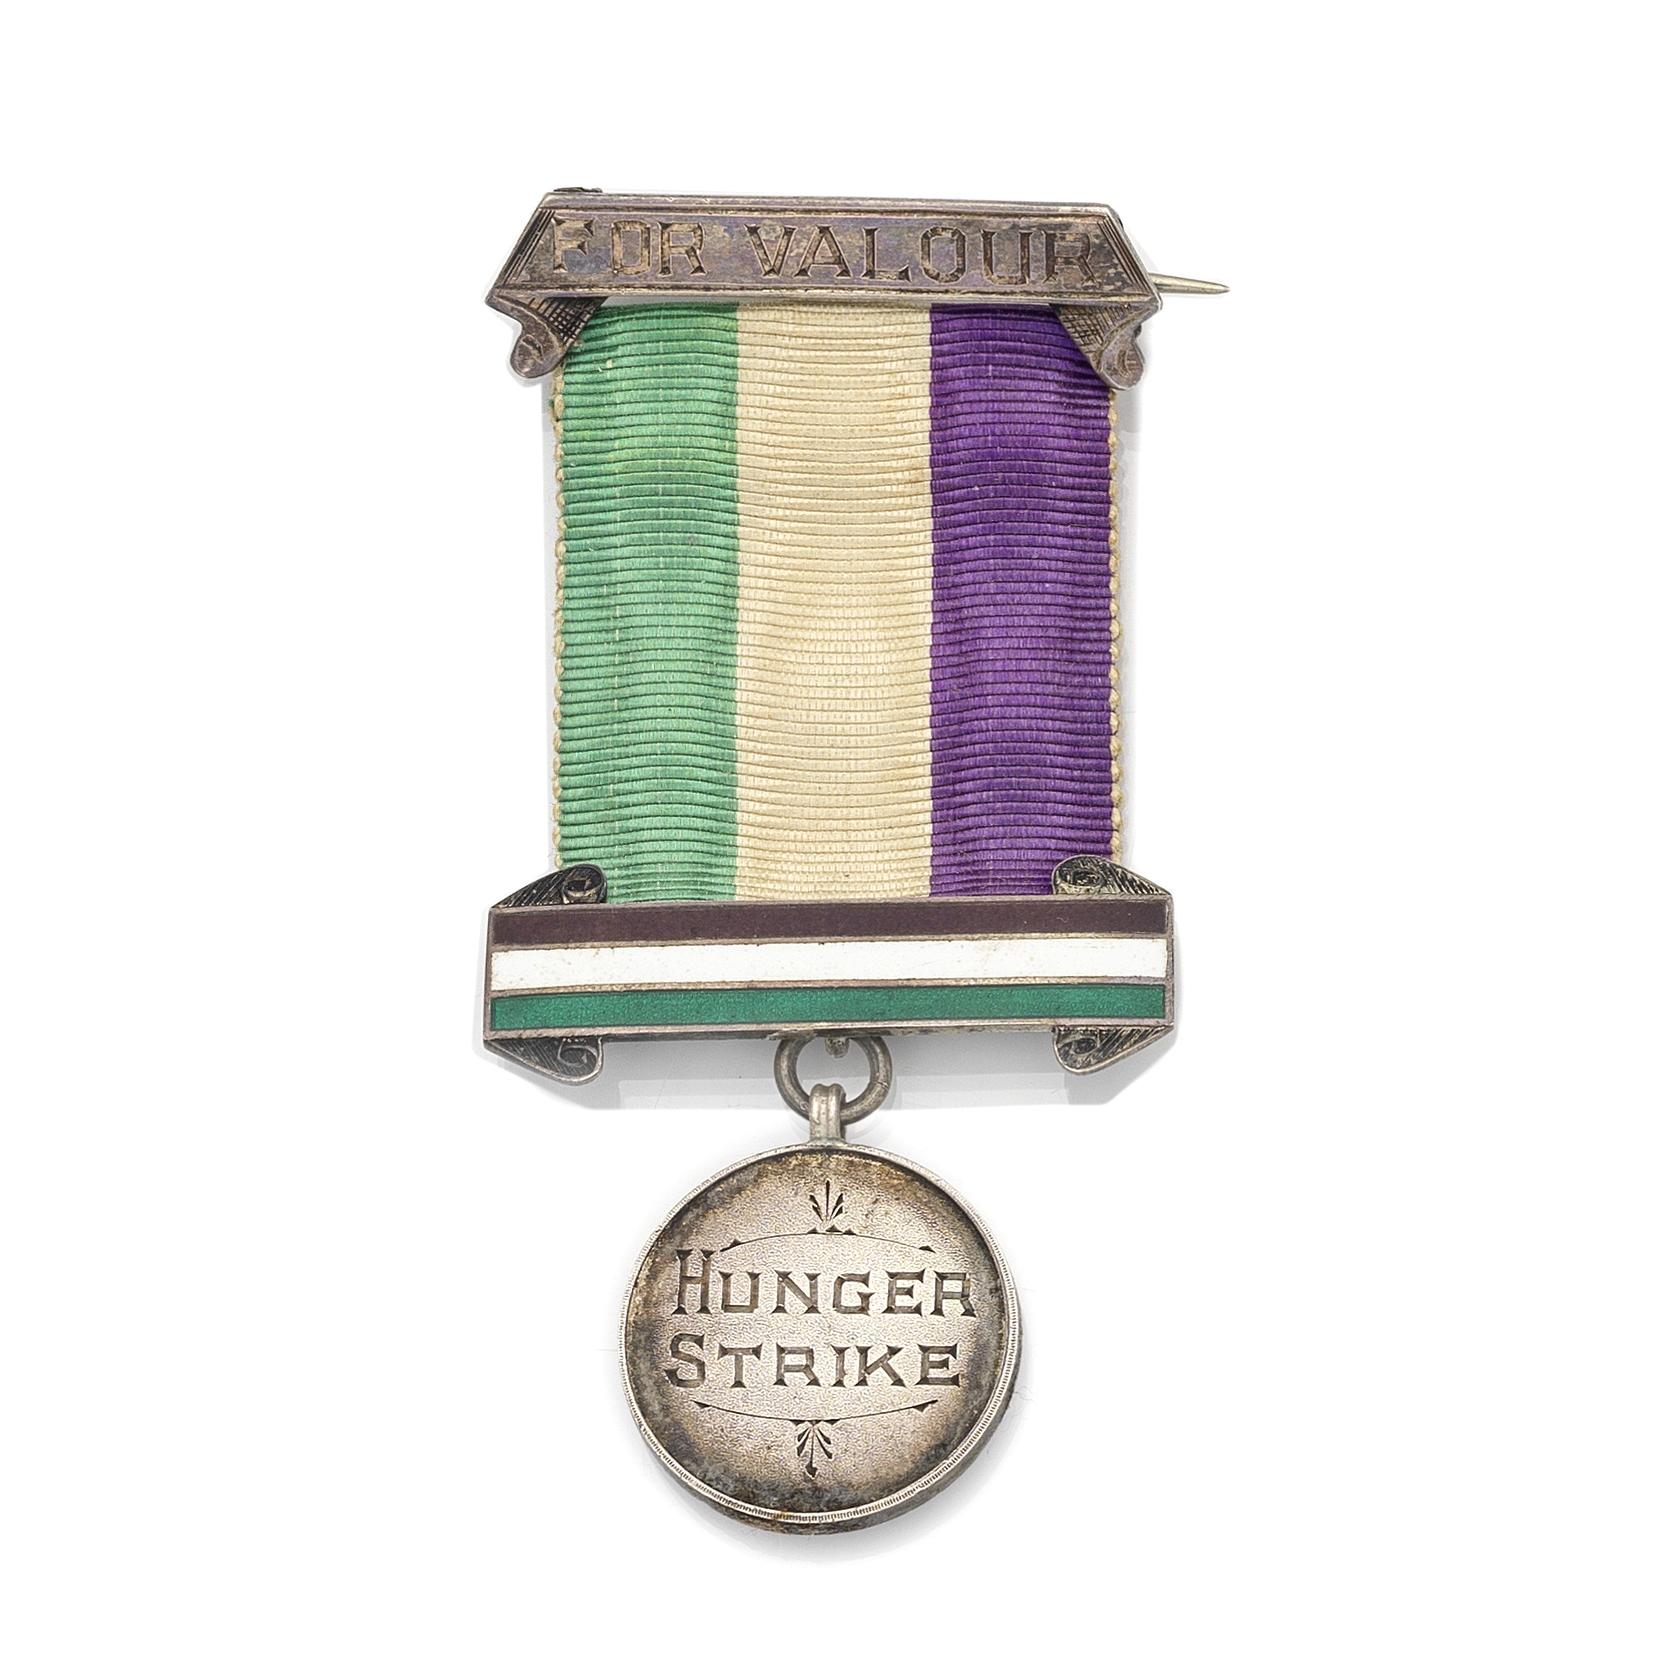 DOWNING (EDITH) Hunger-strike medal awarded by the WSPU to Edith Downing, [1912]